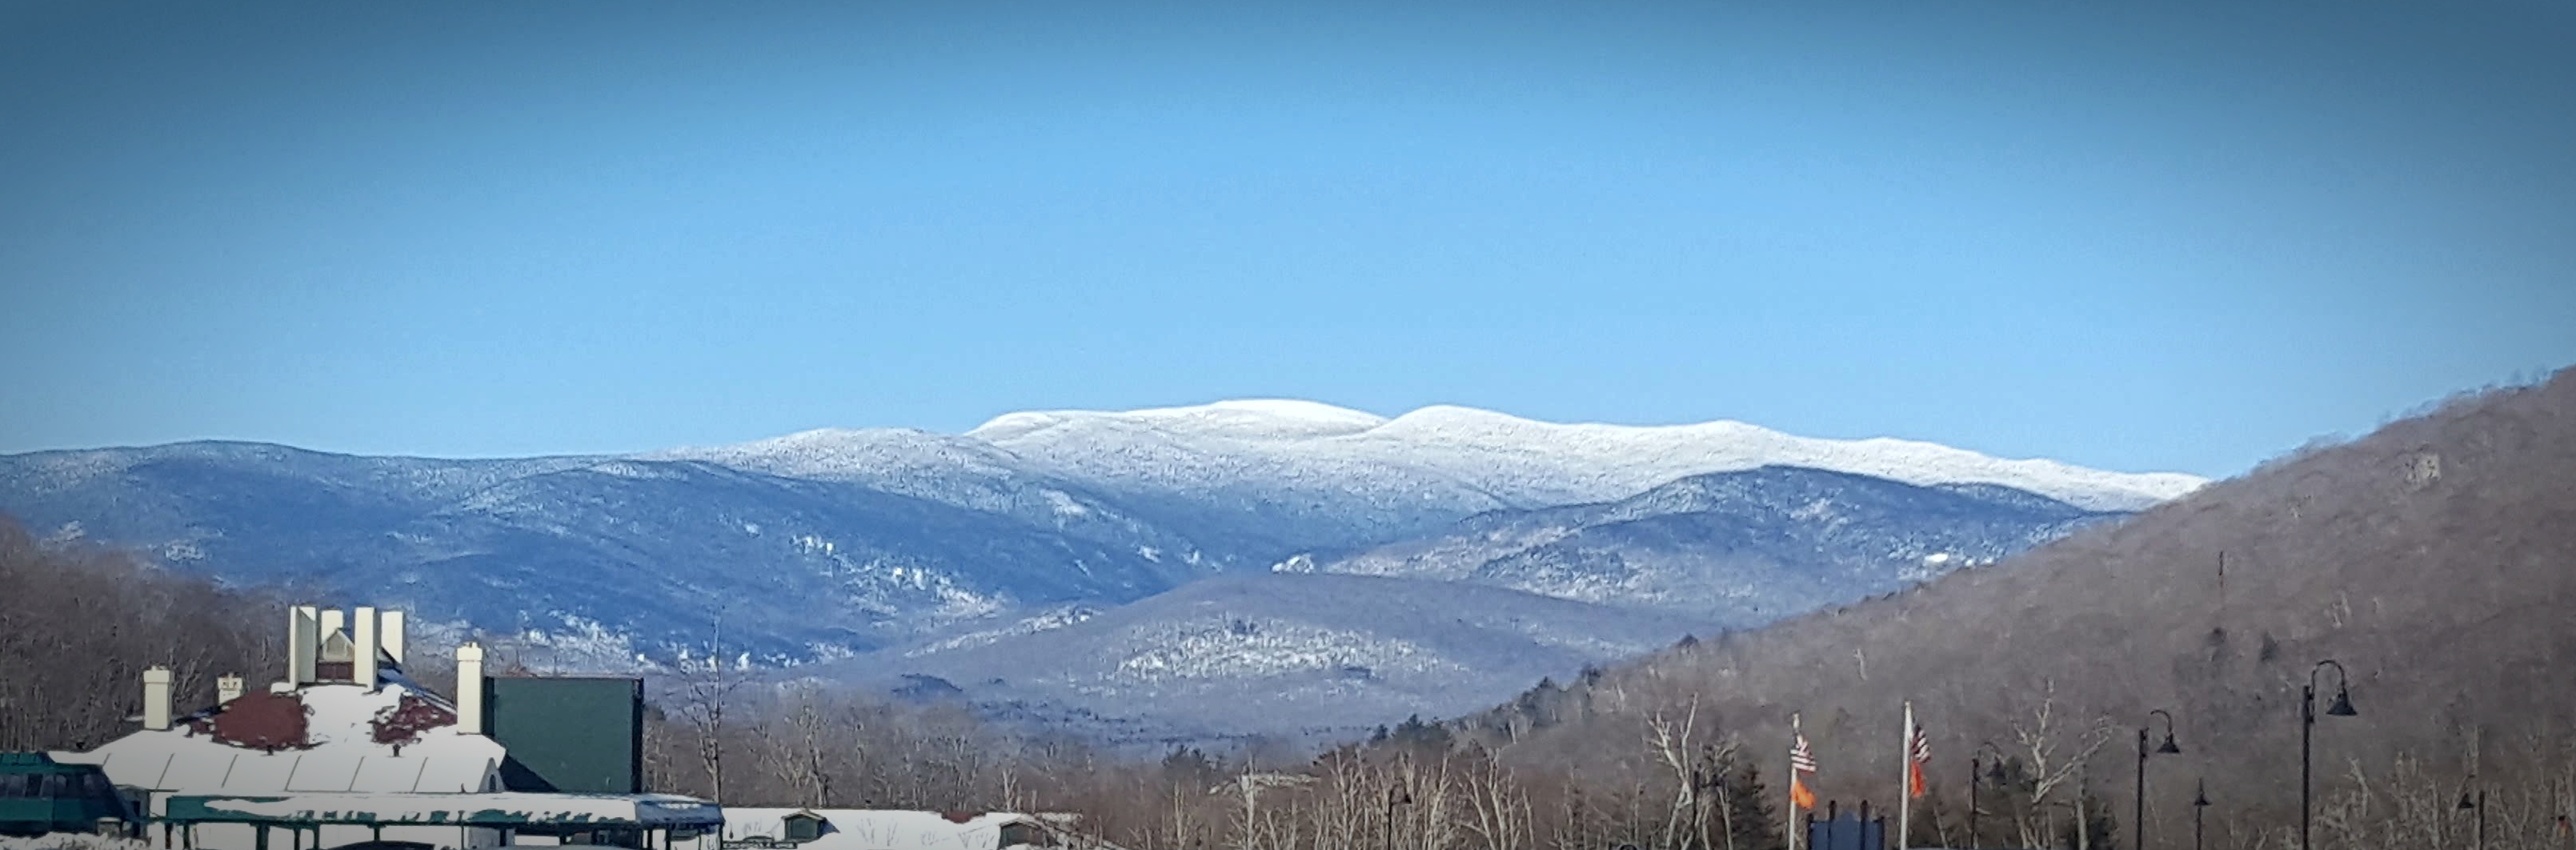 Cannon mountains from afar.